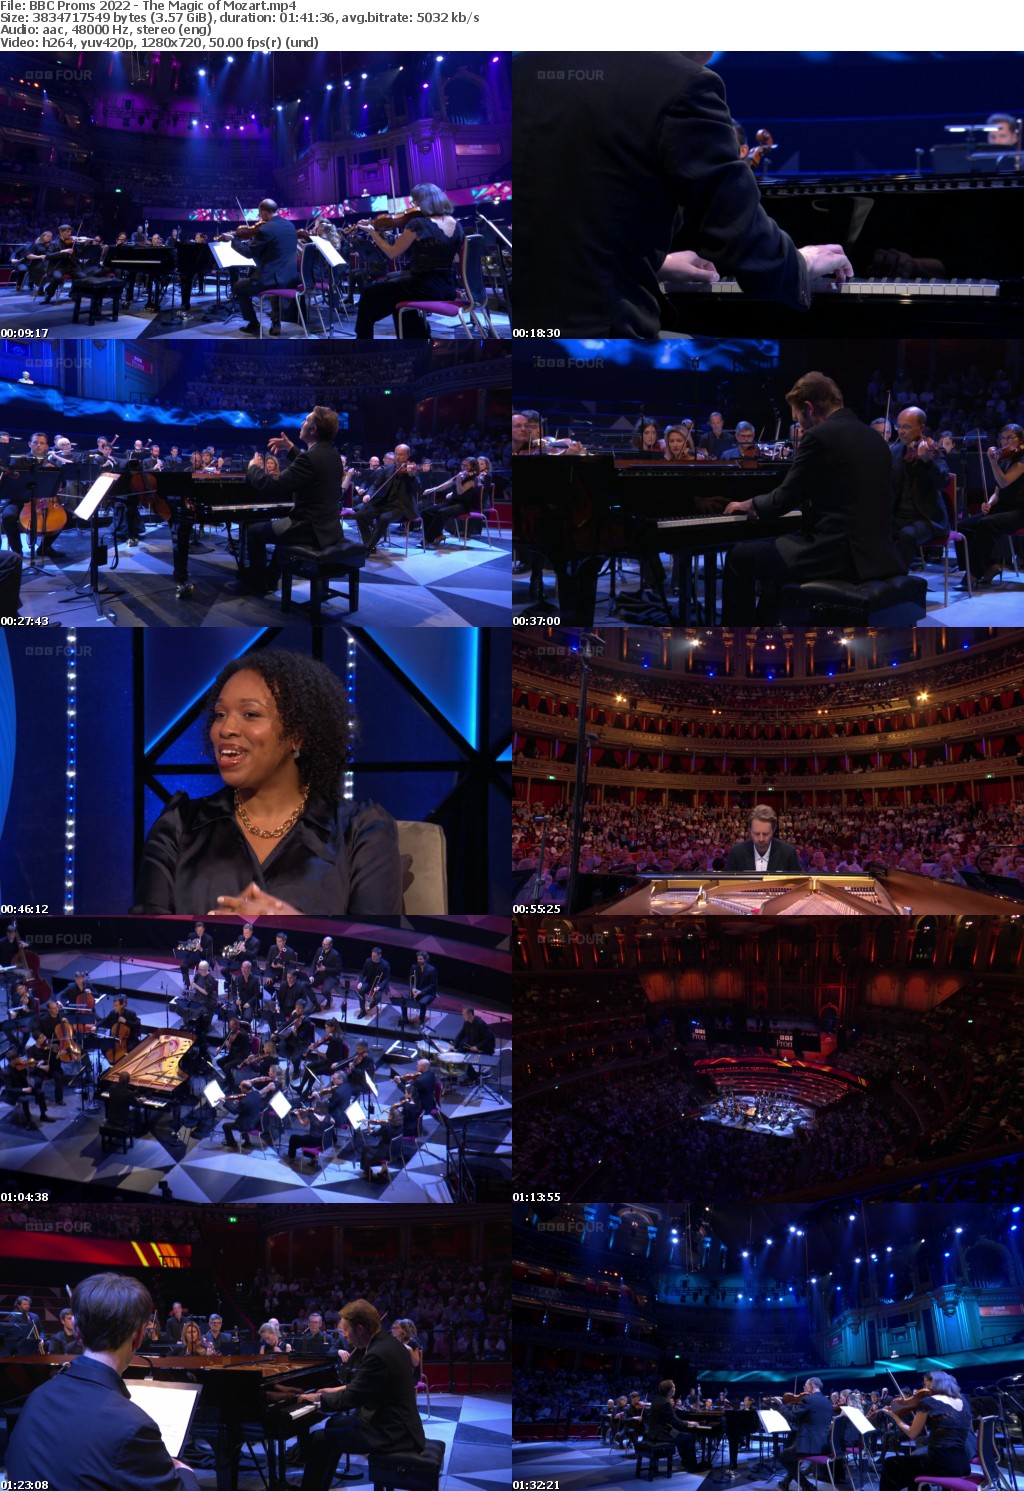 BBC Proms 2022 - The Magic of Mozart (1280x720p HD, 50fps, soft Eng subs)